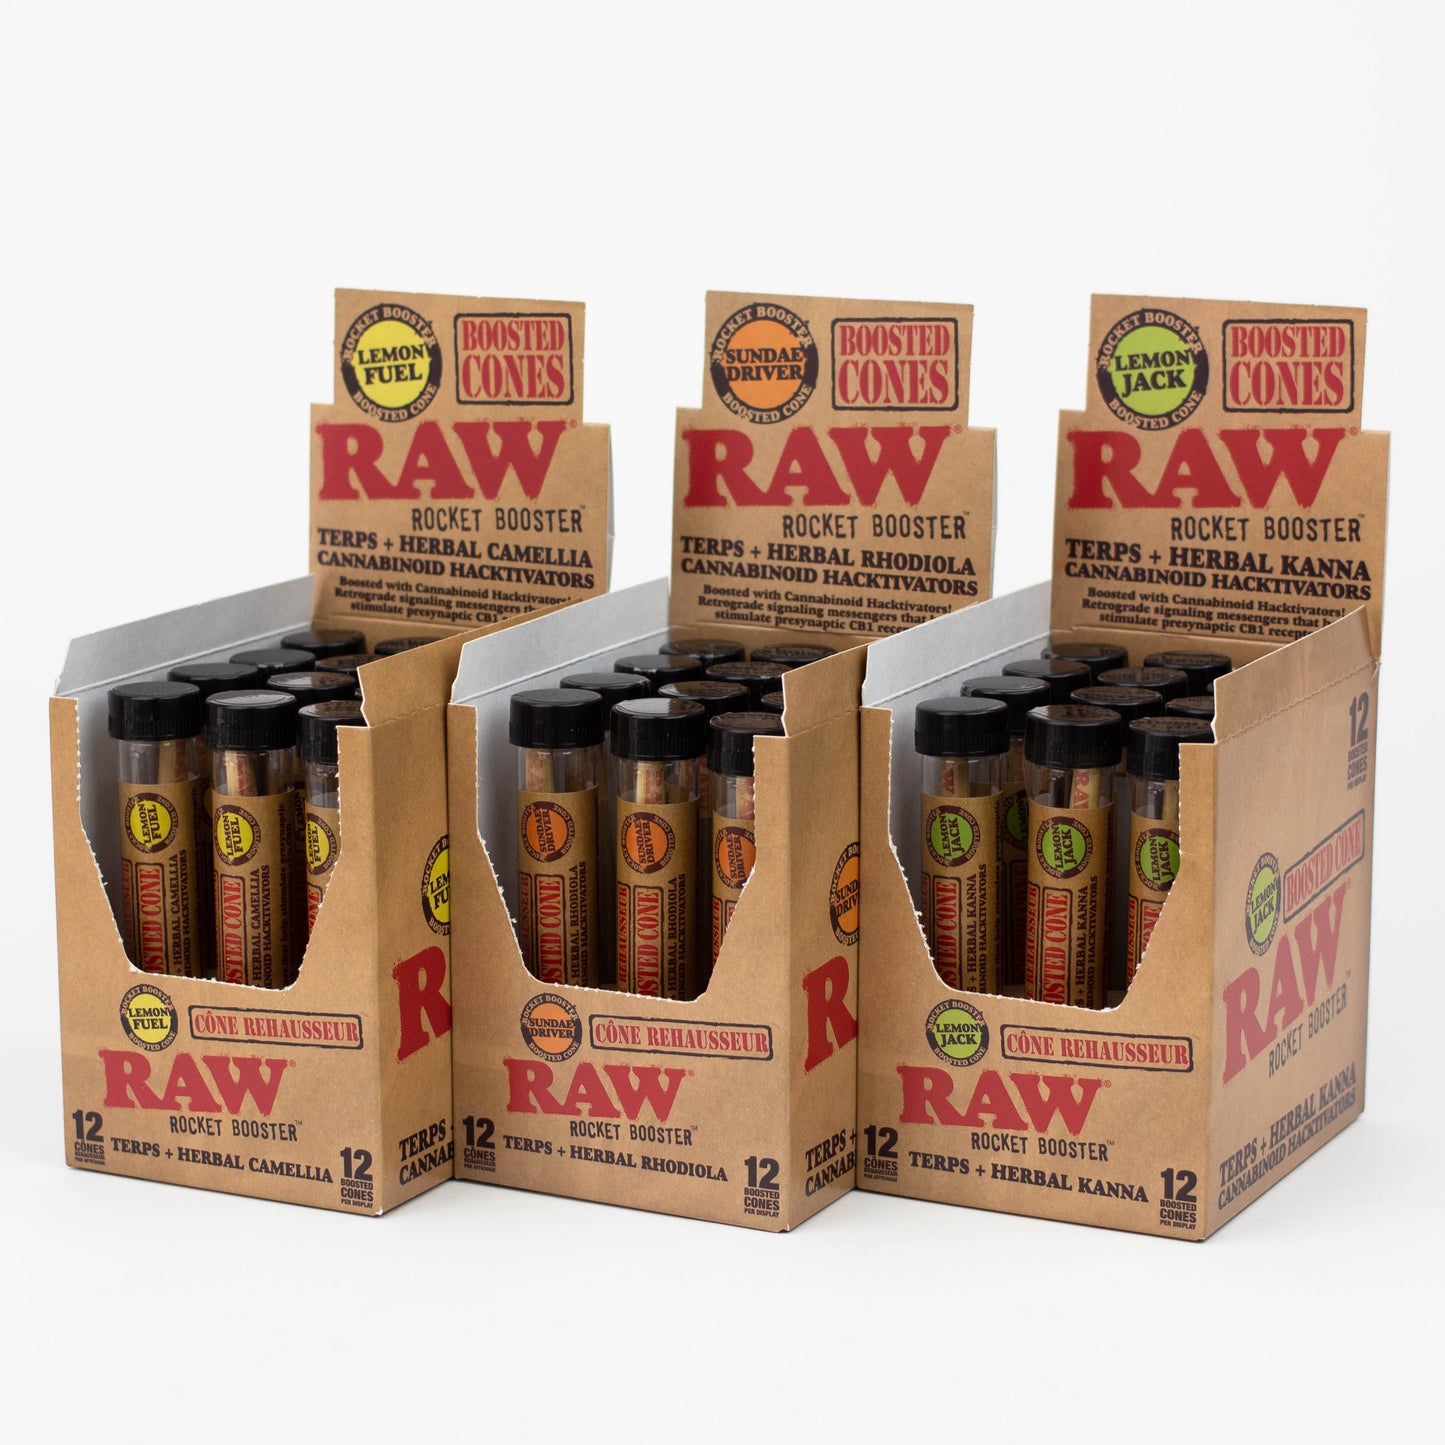 RAW Rocket Booster Cones Box of 12_0